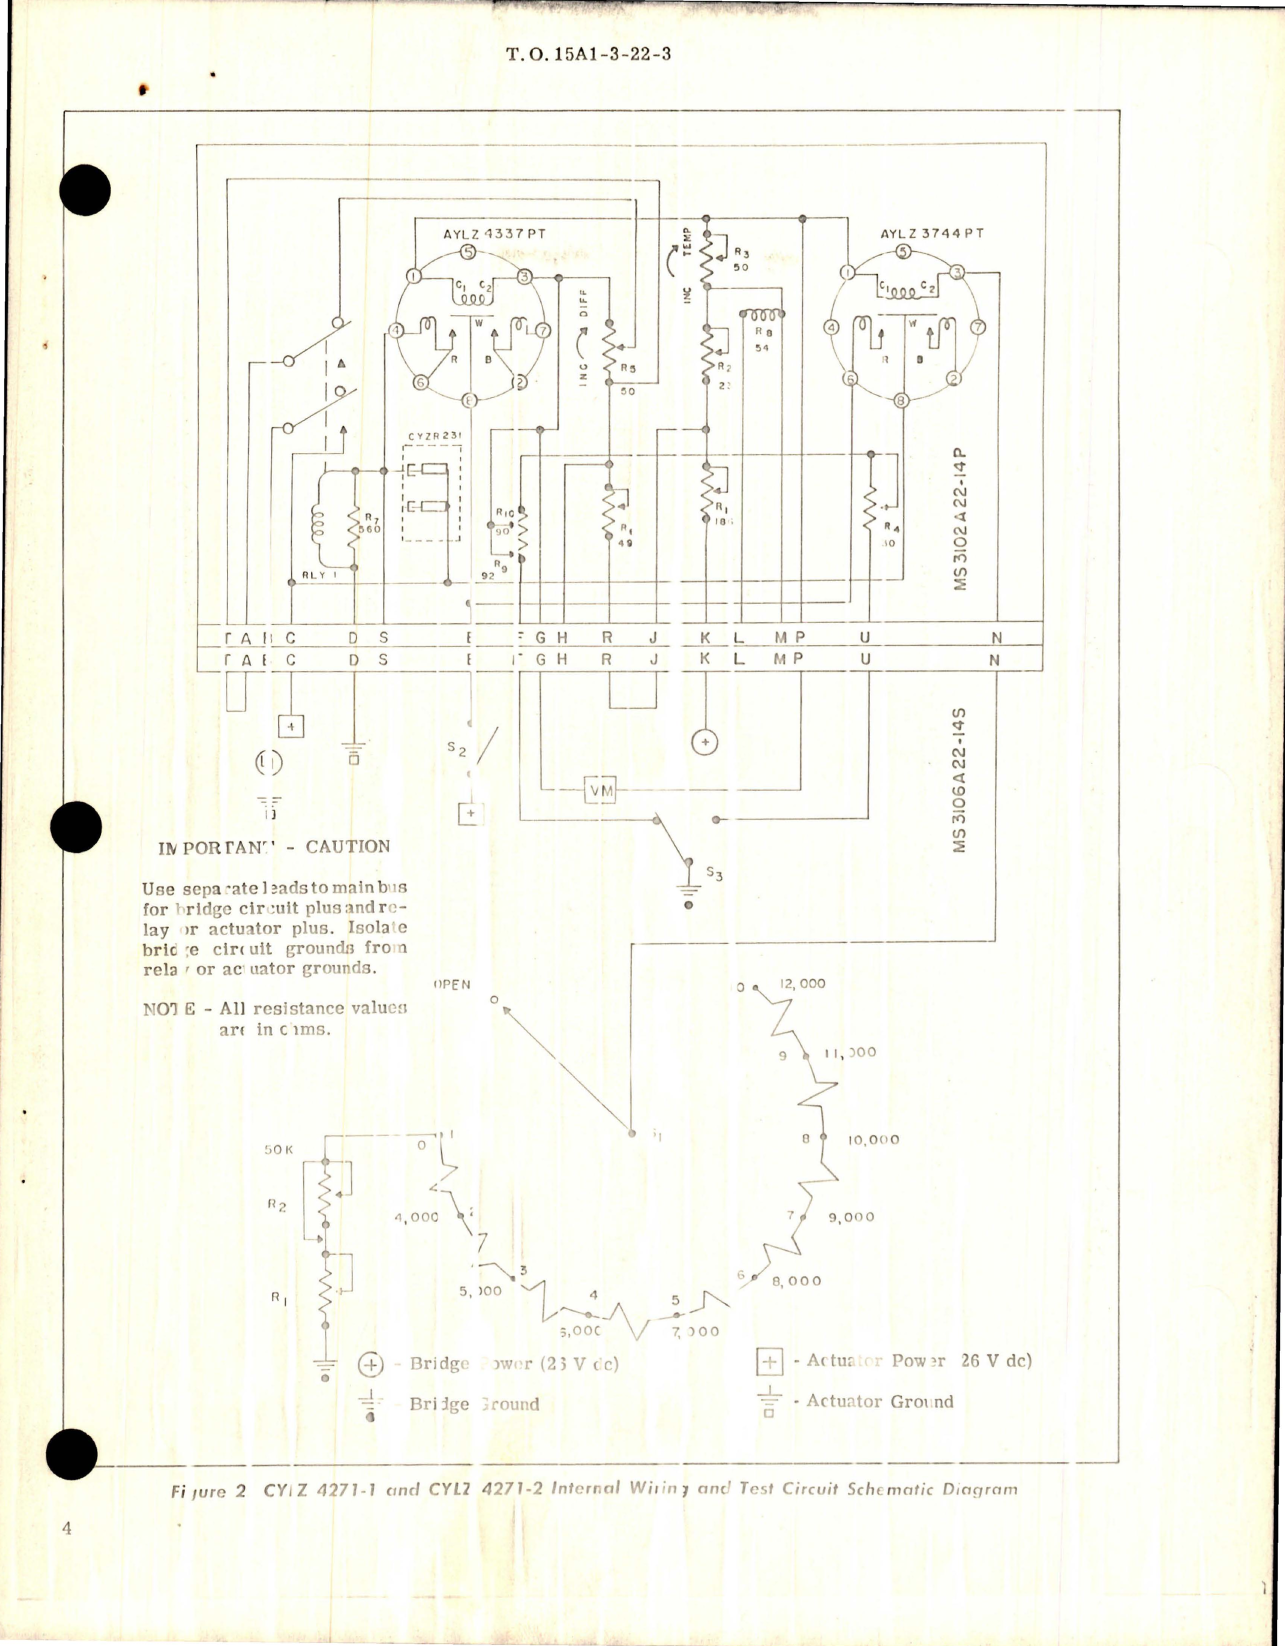 Sample page 7 from AirCorps Library document: Overhaul Instructions with Parts for Control Box, Windshield Temperature 